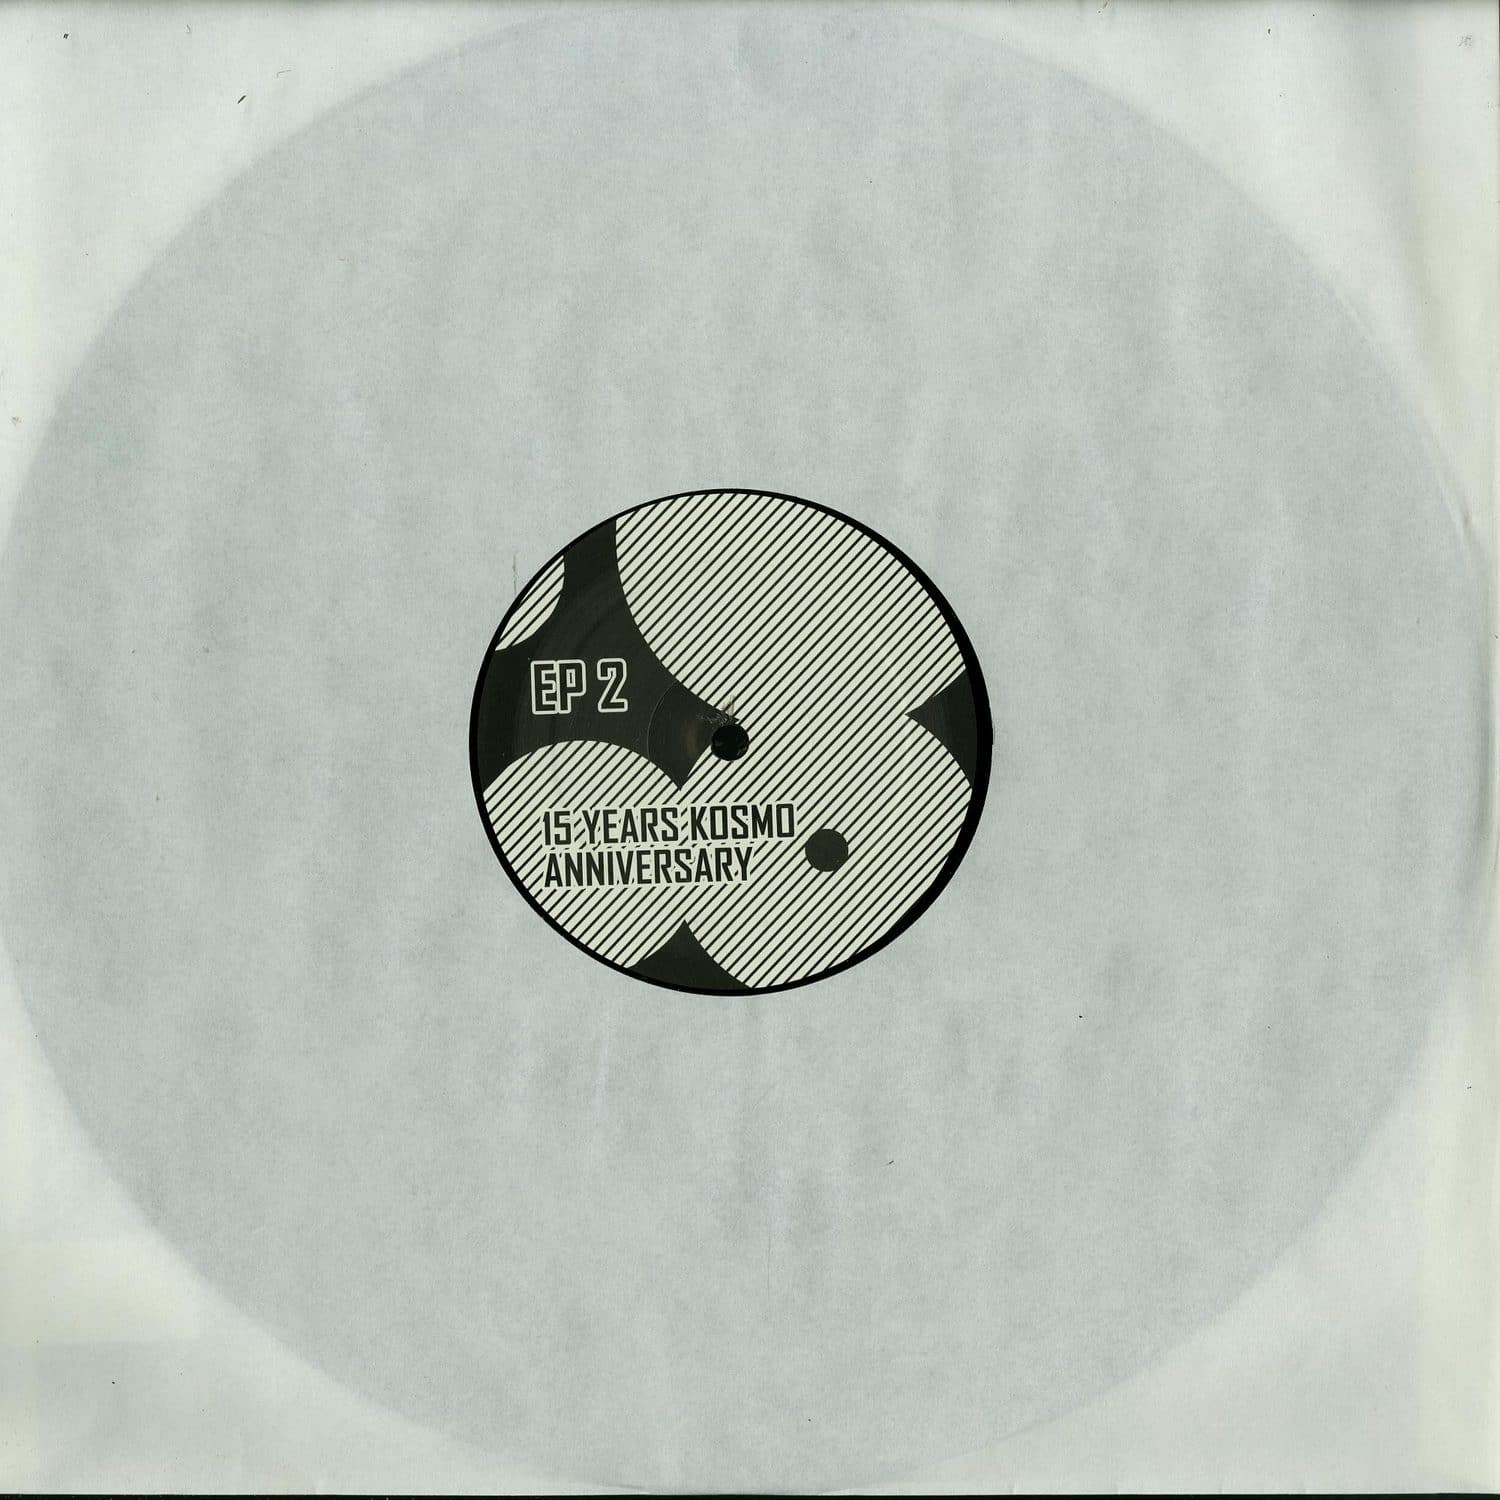 Phil Fuldner / Da Hool / Dial M For Moguai - PART 2 - 15 YEARS ANNIVERSARY EP